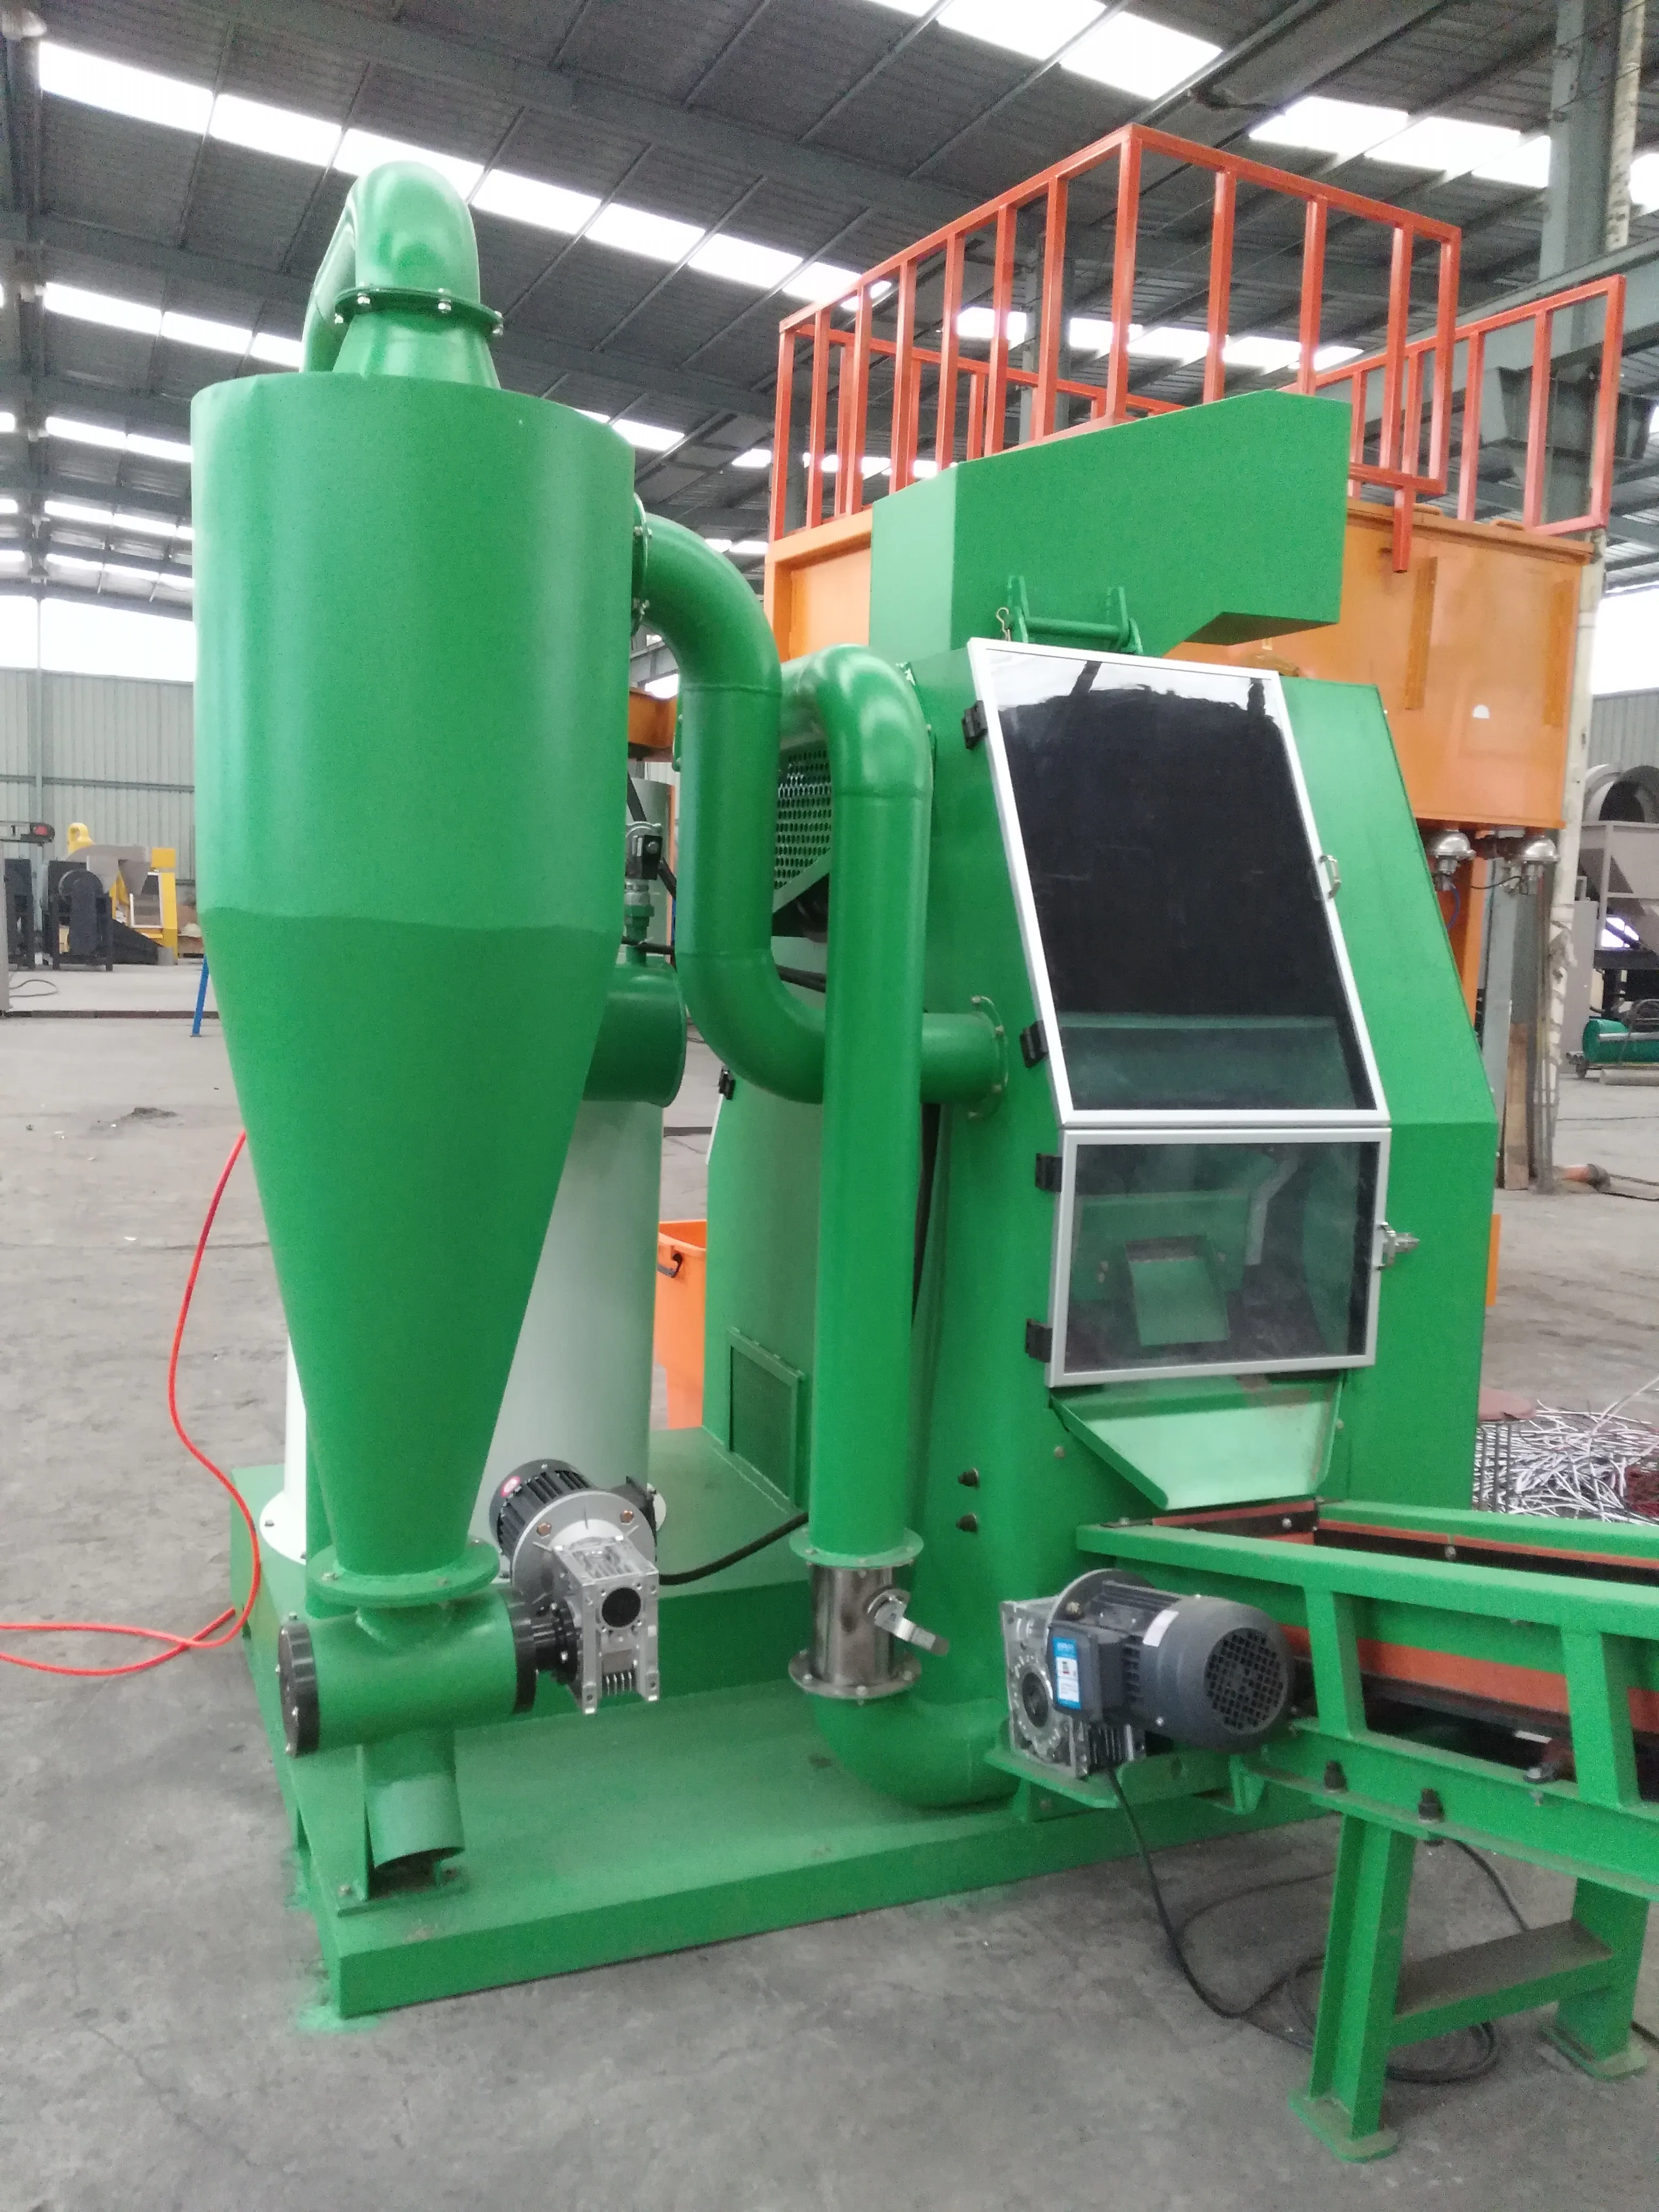 
High quality scrap copper wire recycling machine / copper wire recycling machine / copper wire granulator for sale 